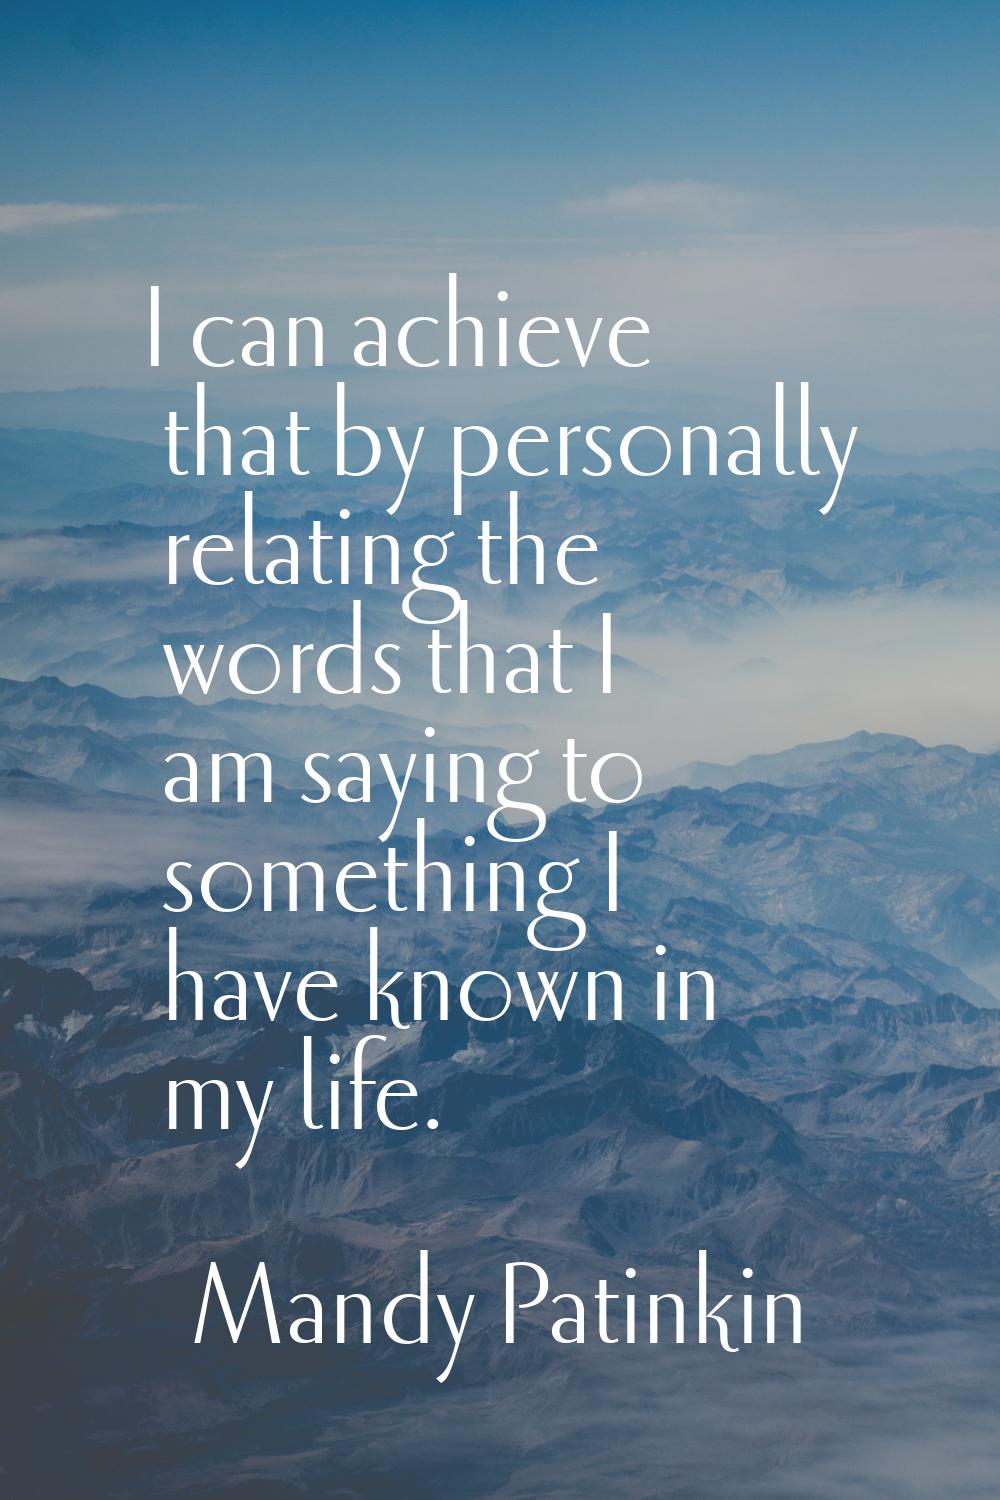 I can achieve that by personally relating the words that I am saying to something I have known in m